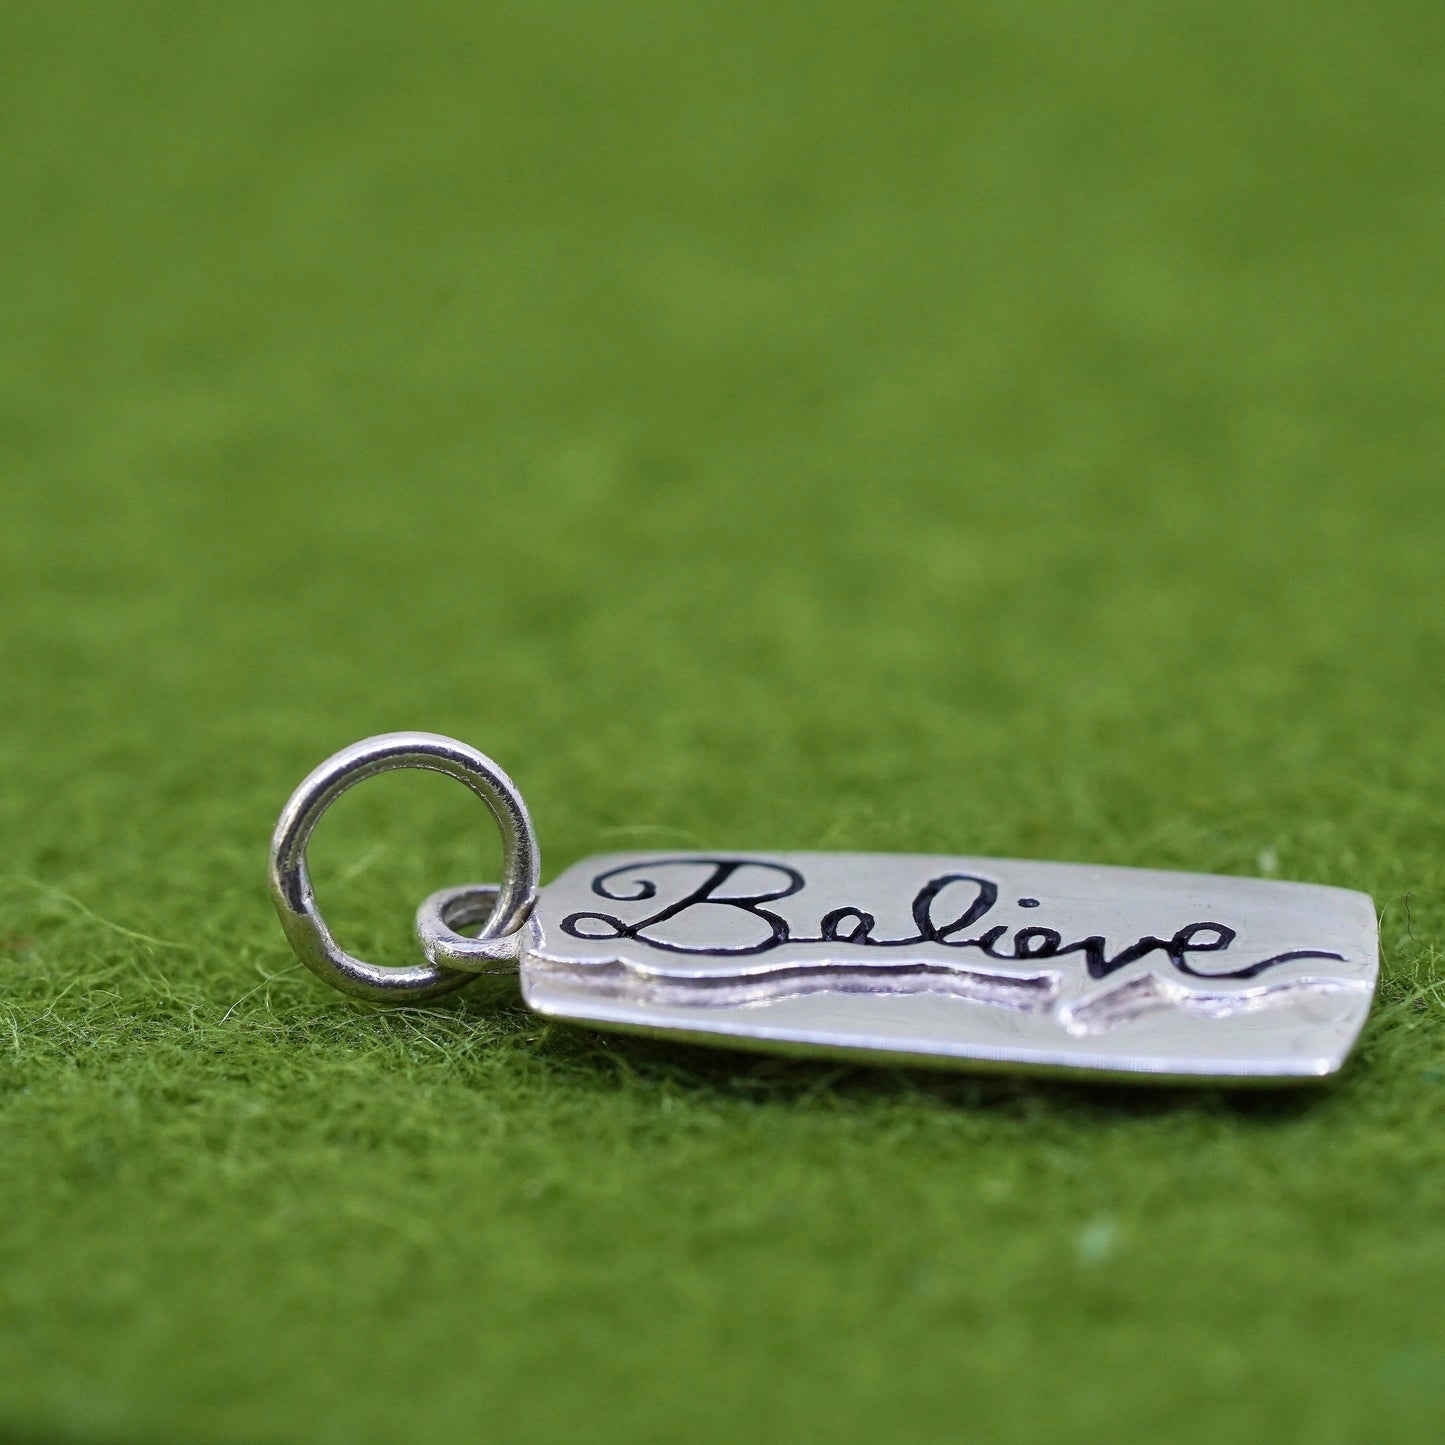 Vintage sterling silver charm, 925 silver tag with "believe" embossed